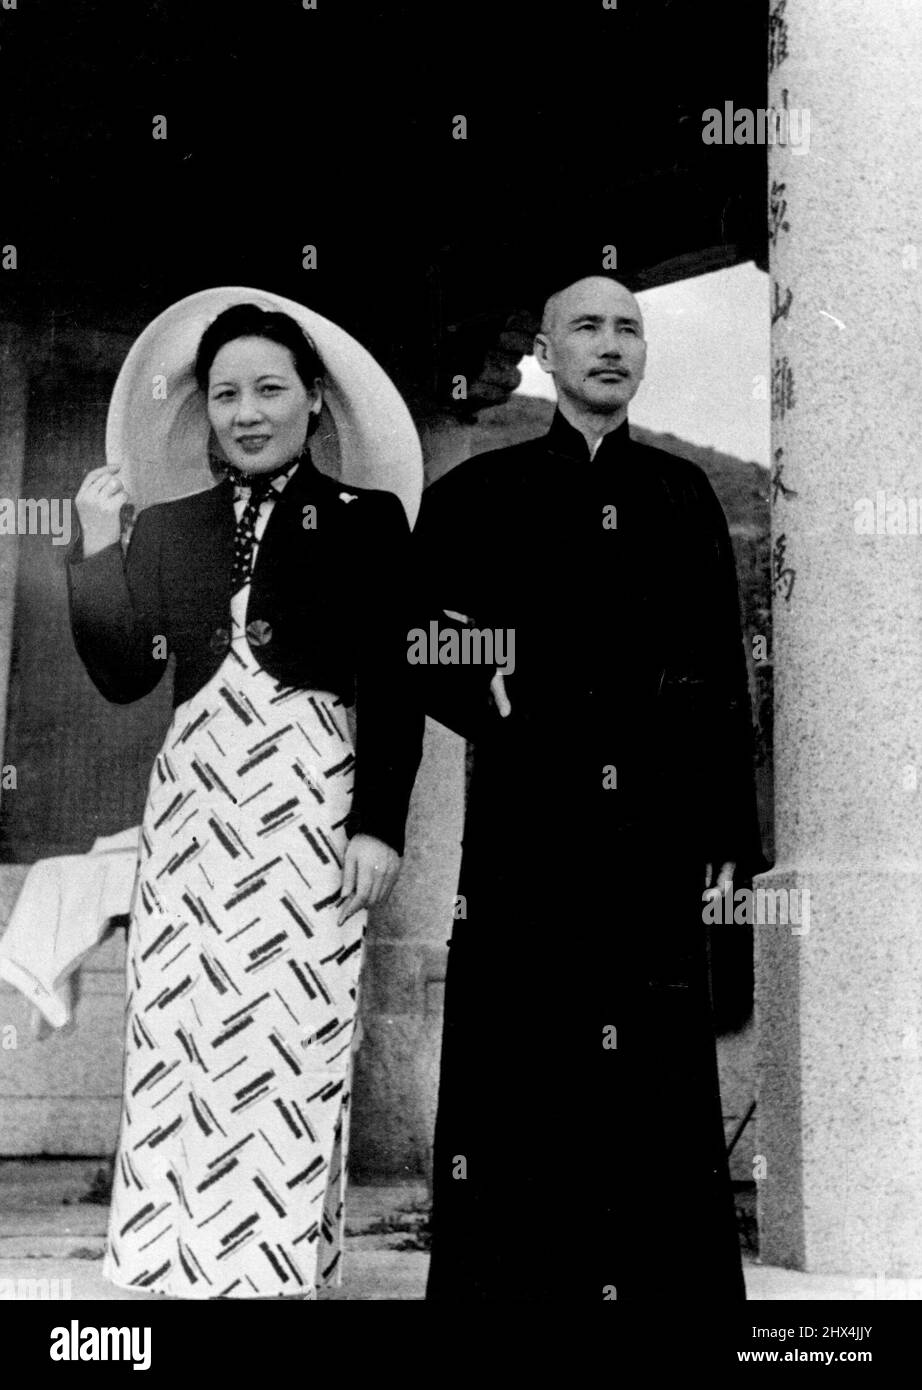 Chiang Kai Shek - General & With Wife. December 8, 1941. (Photo by The Central News Agency). Stock Photo